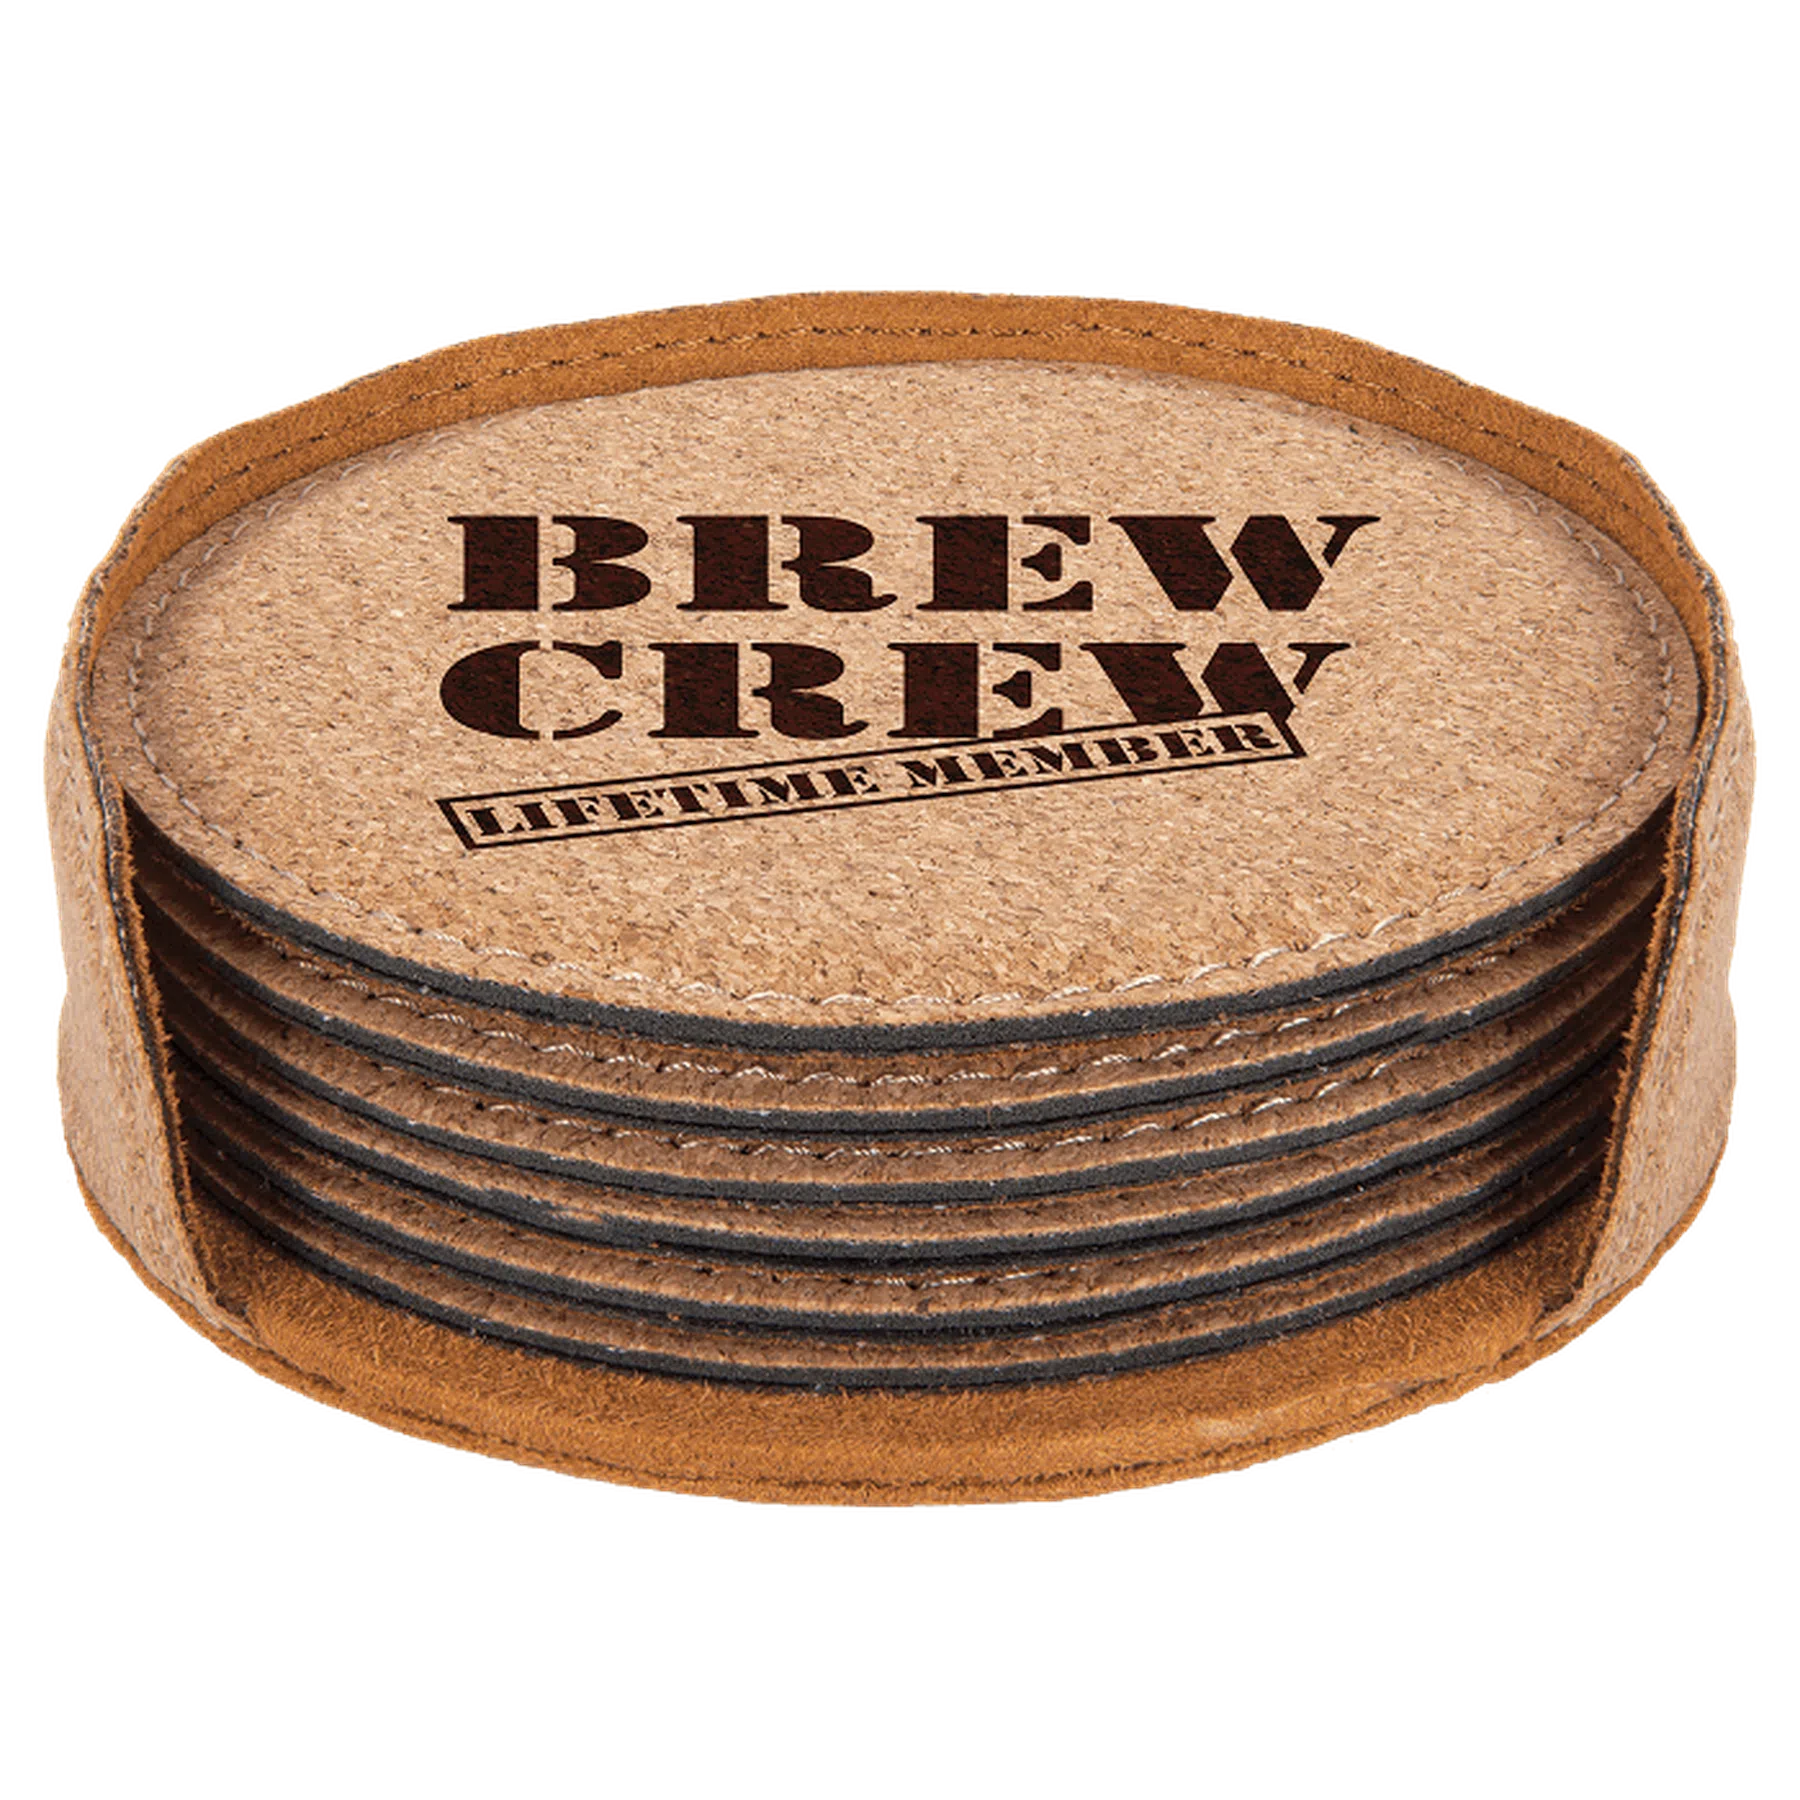 4" Personalized Cork Coaster Sets (Round and Square)